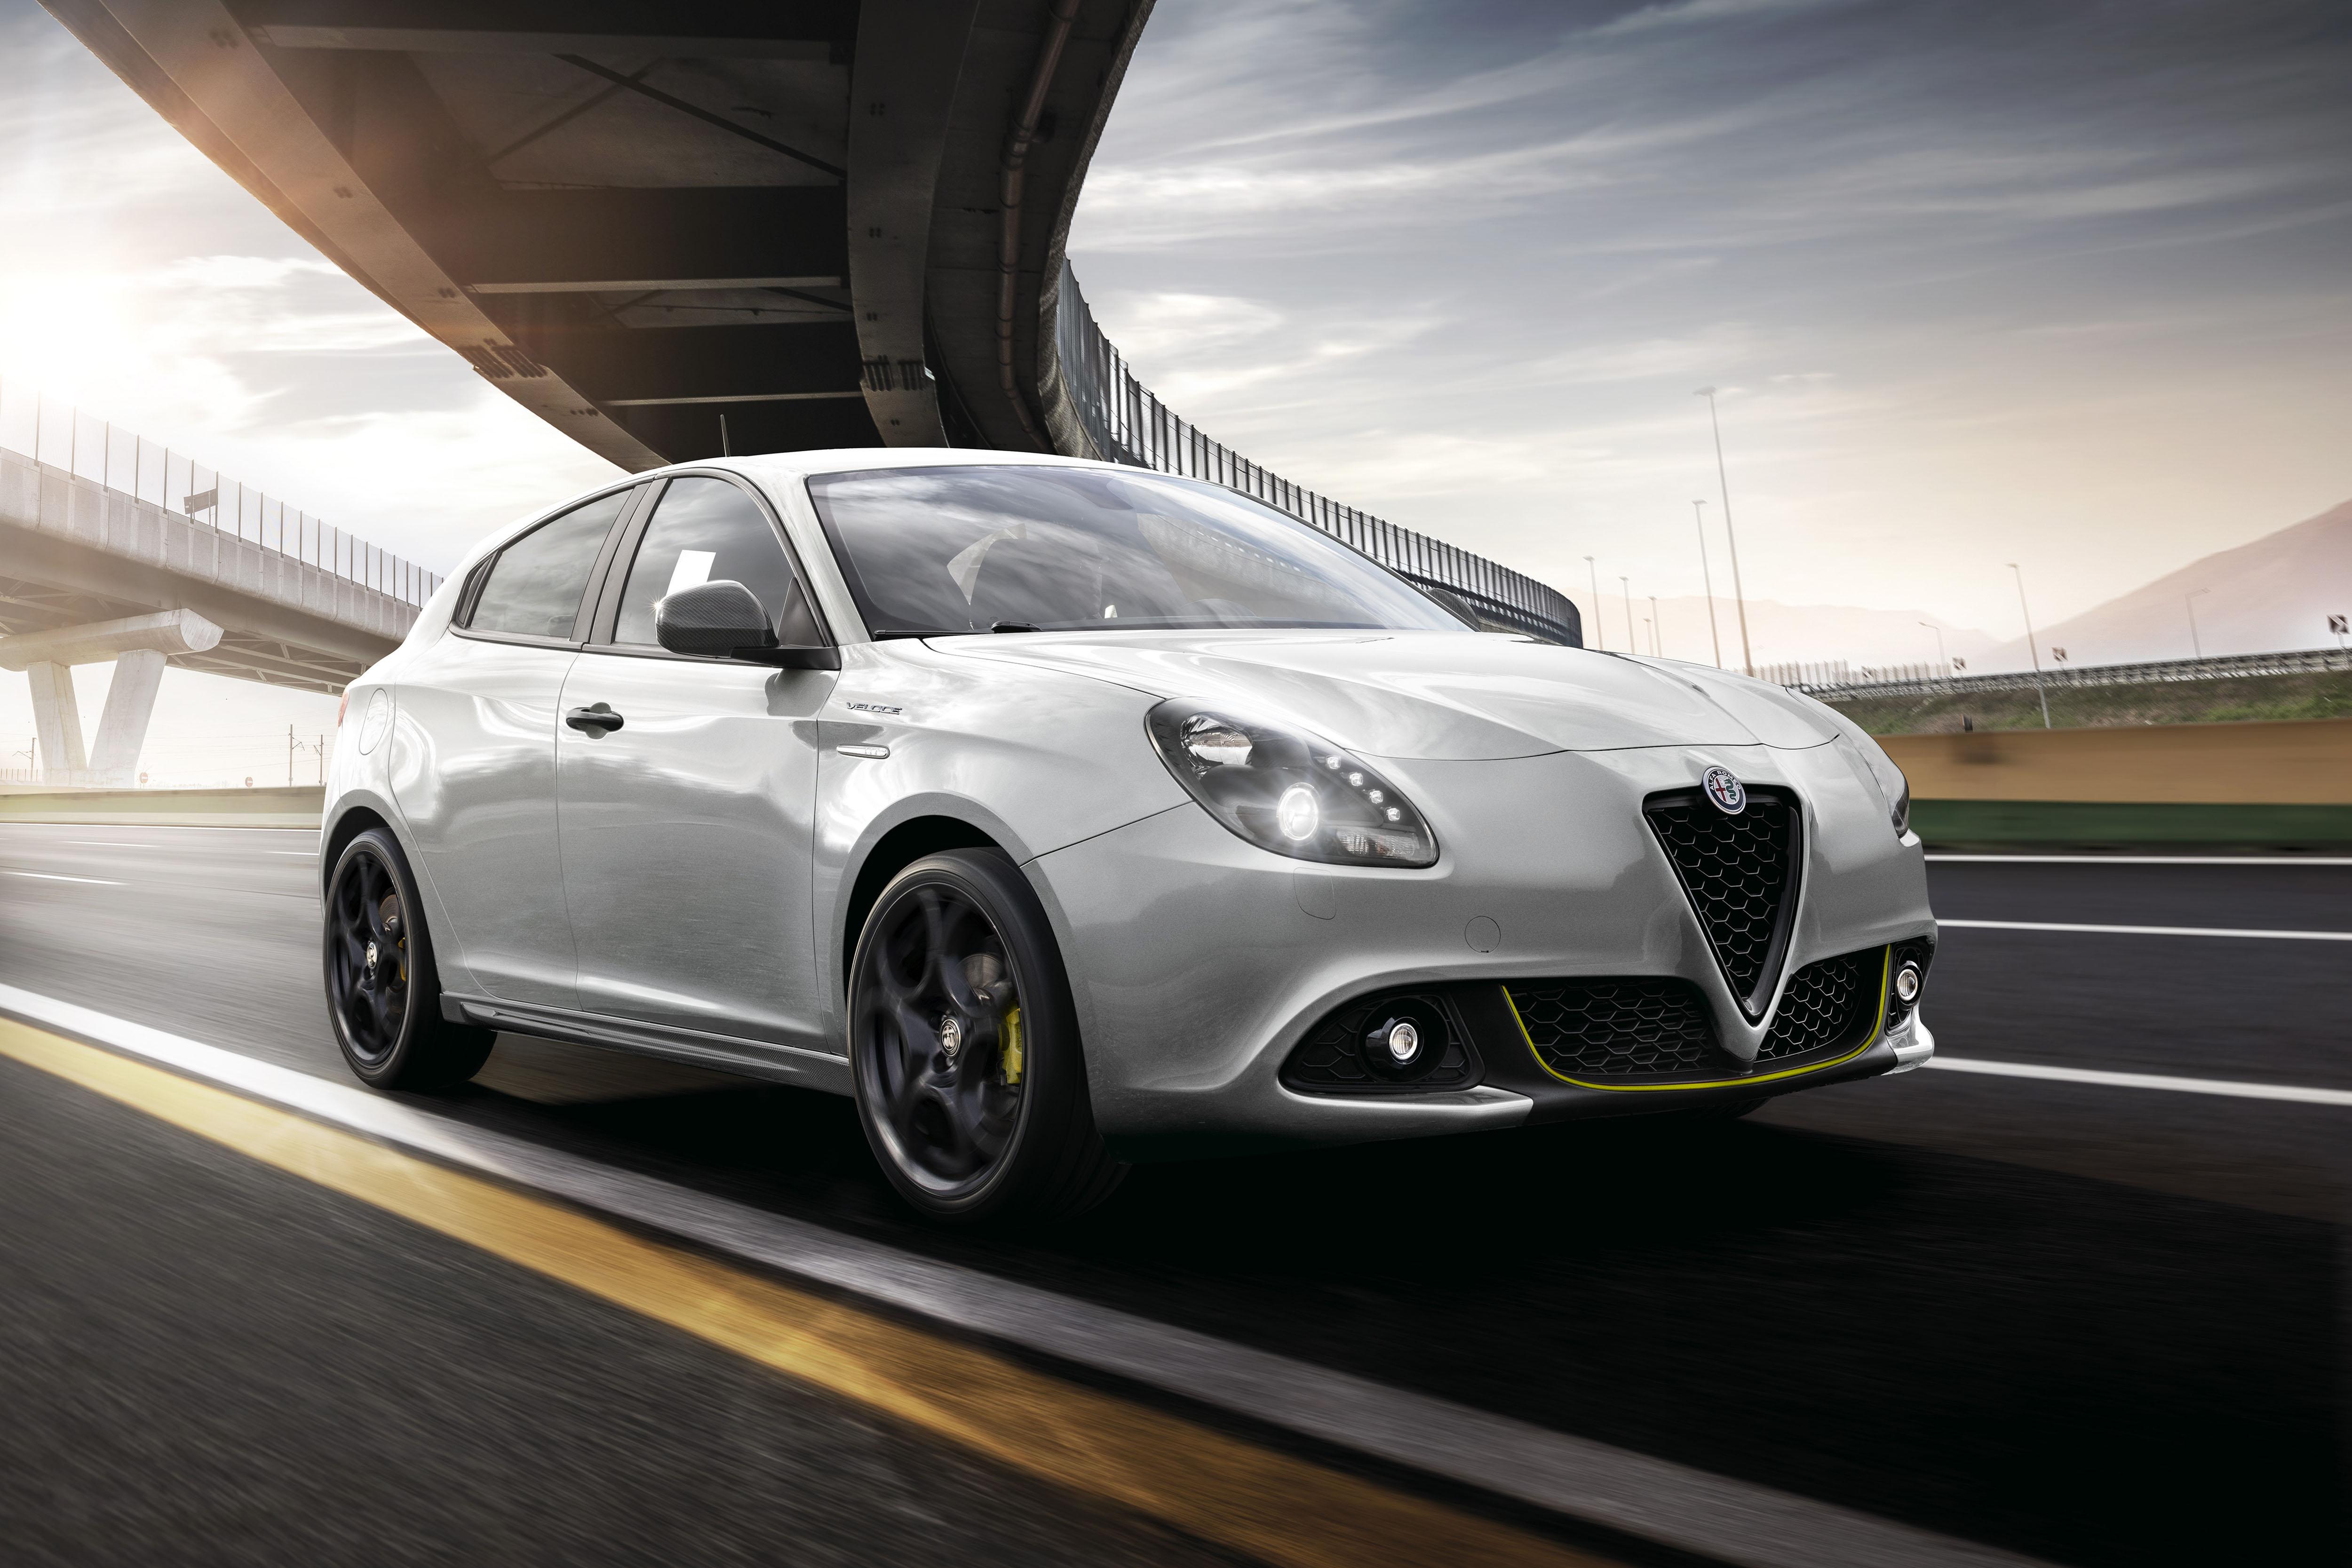 Alfa Romeo Giulietta Review, Price and Specification